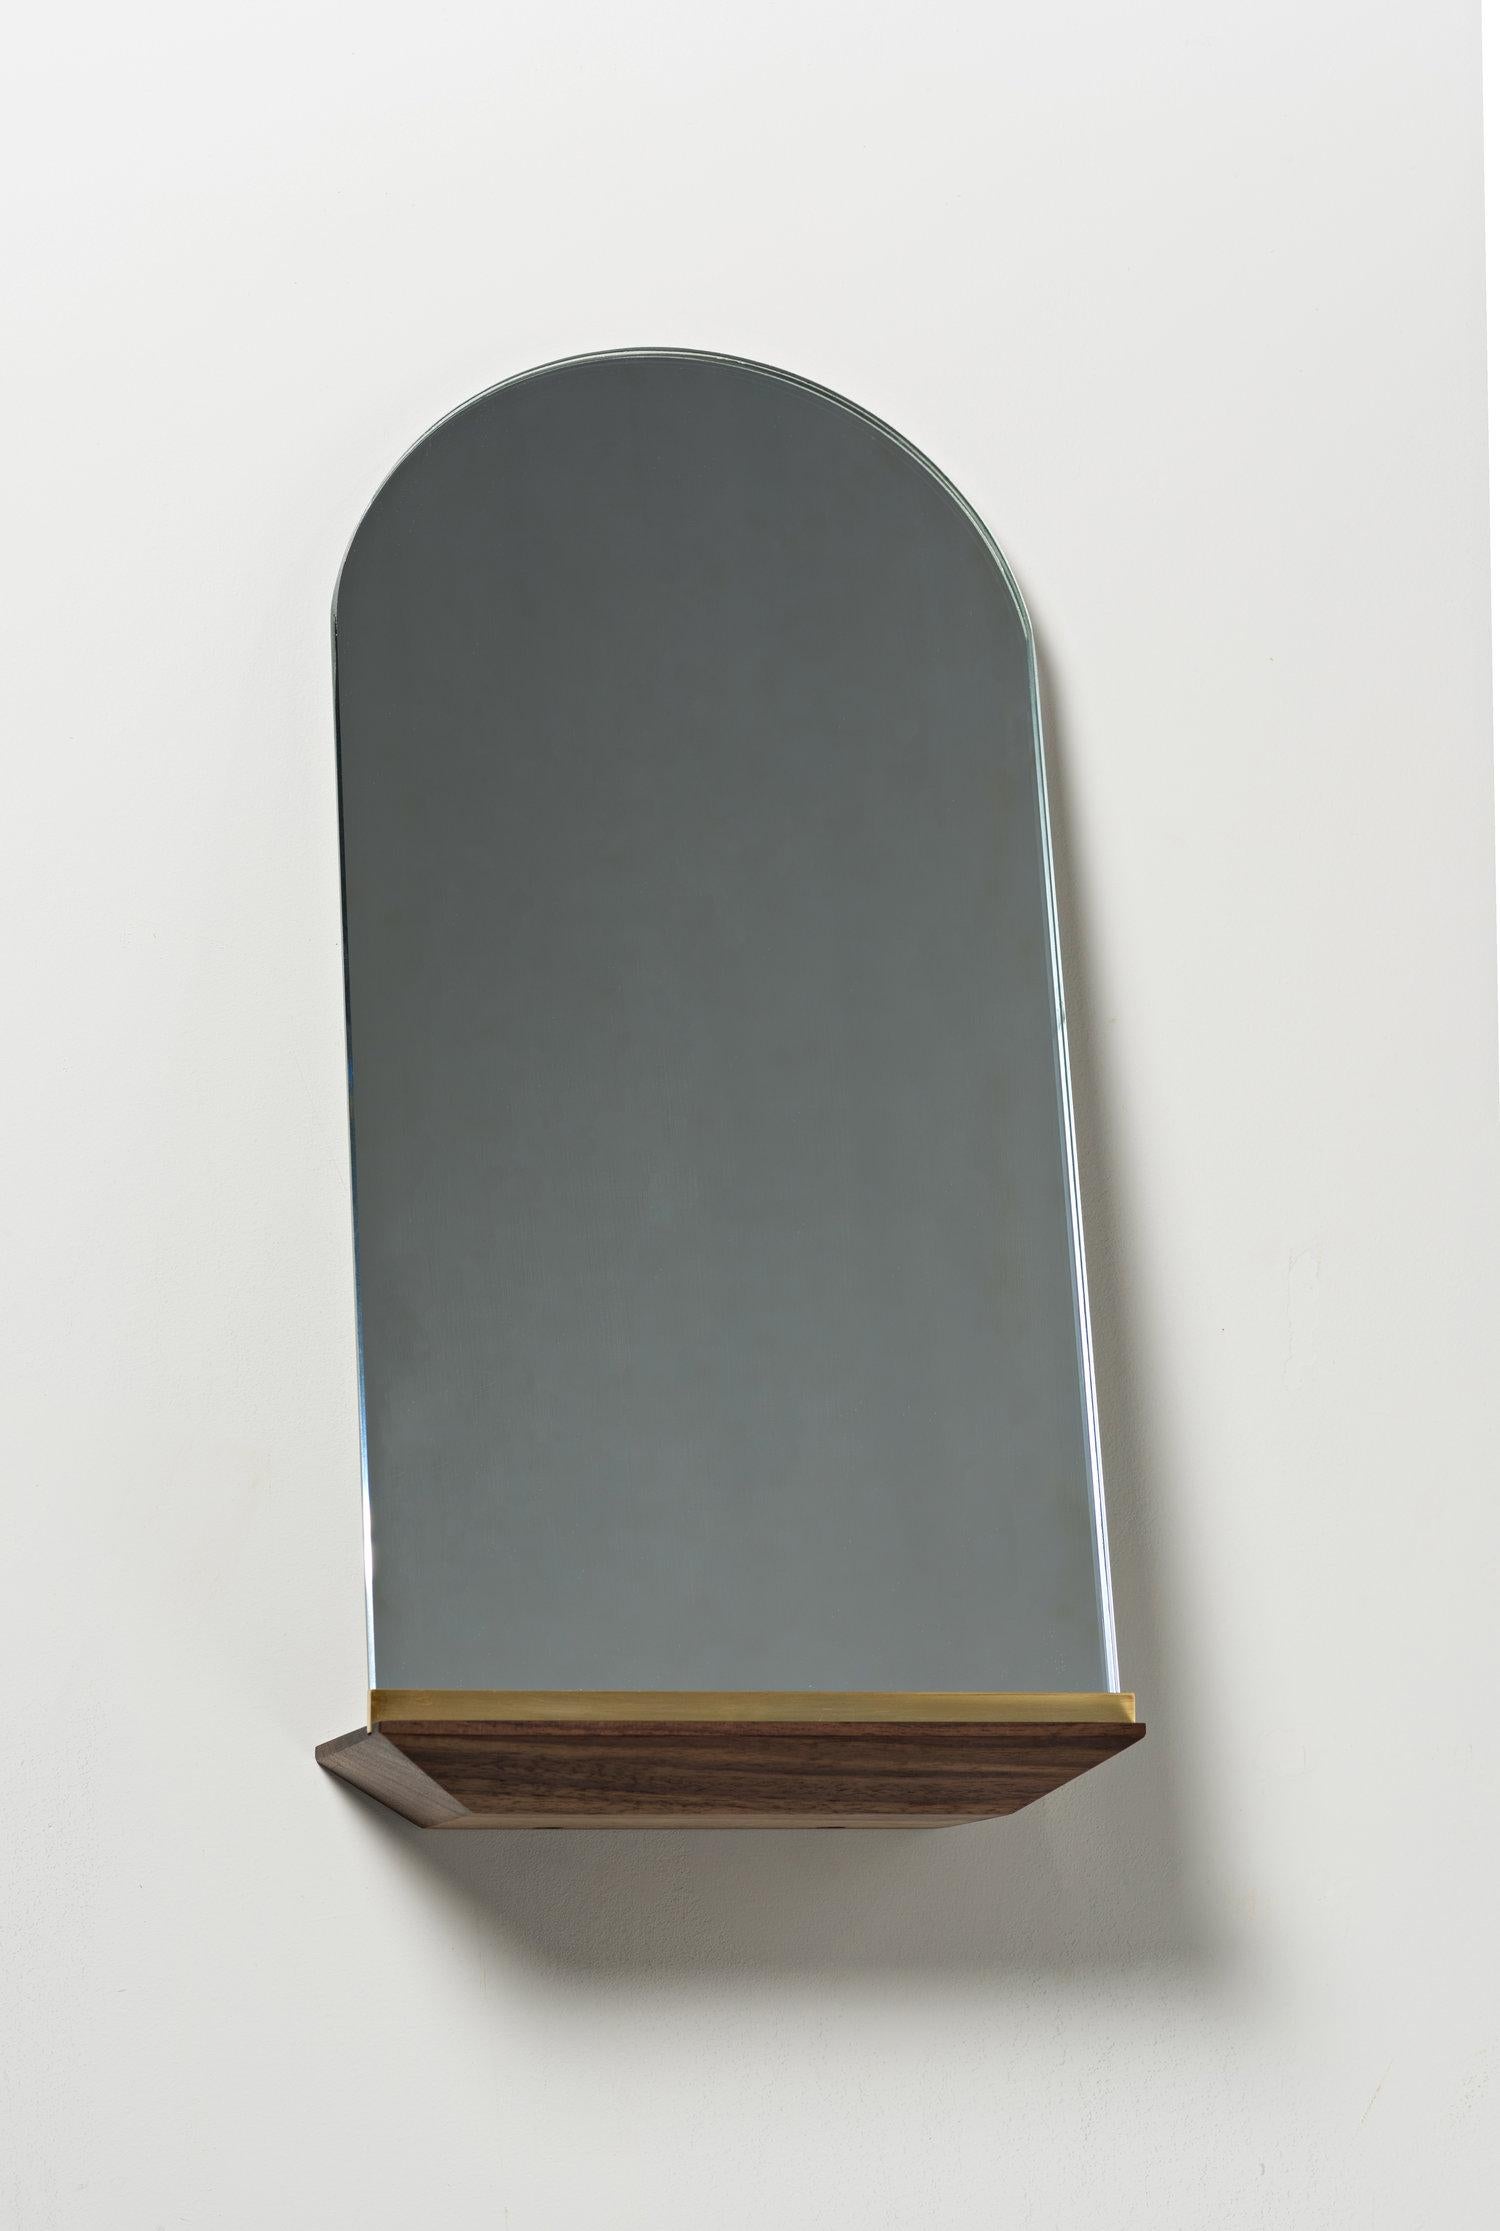 American Daily-Use Mirror #4 by Phaedo For Sale